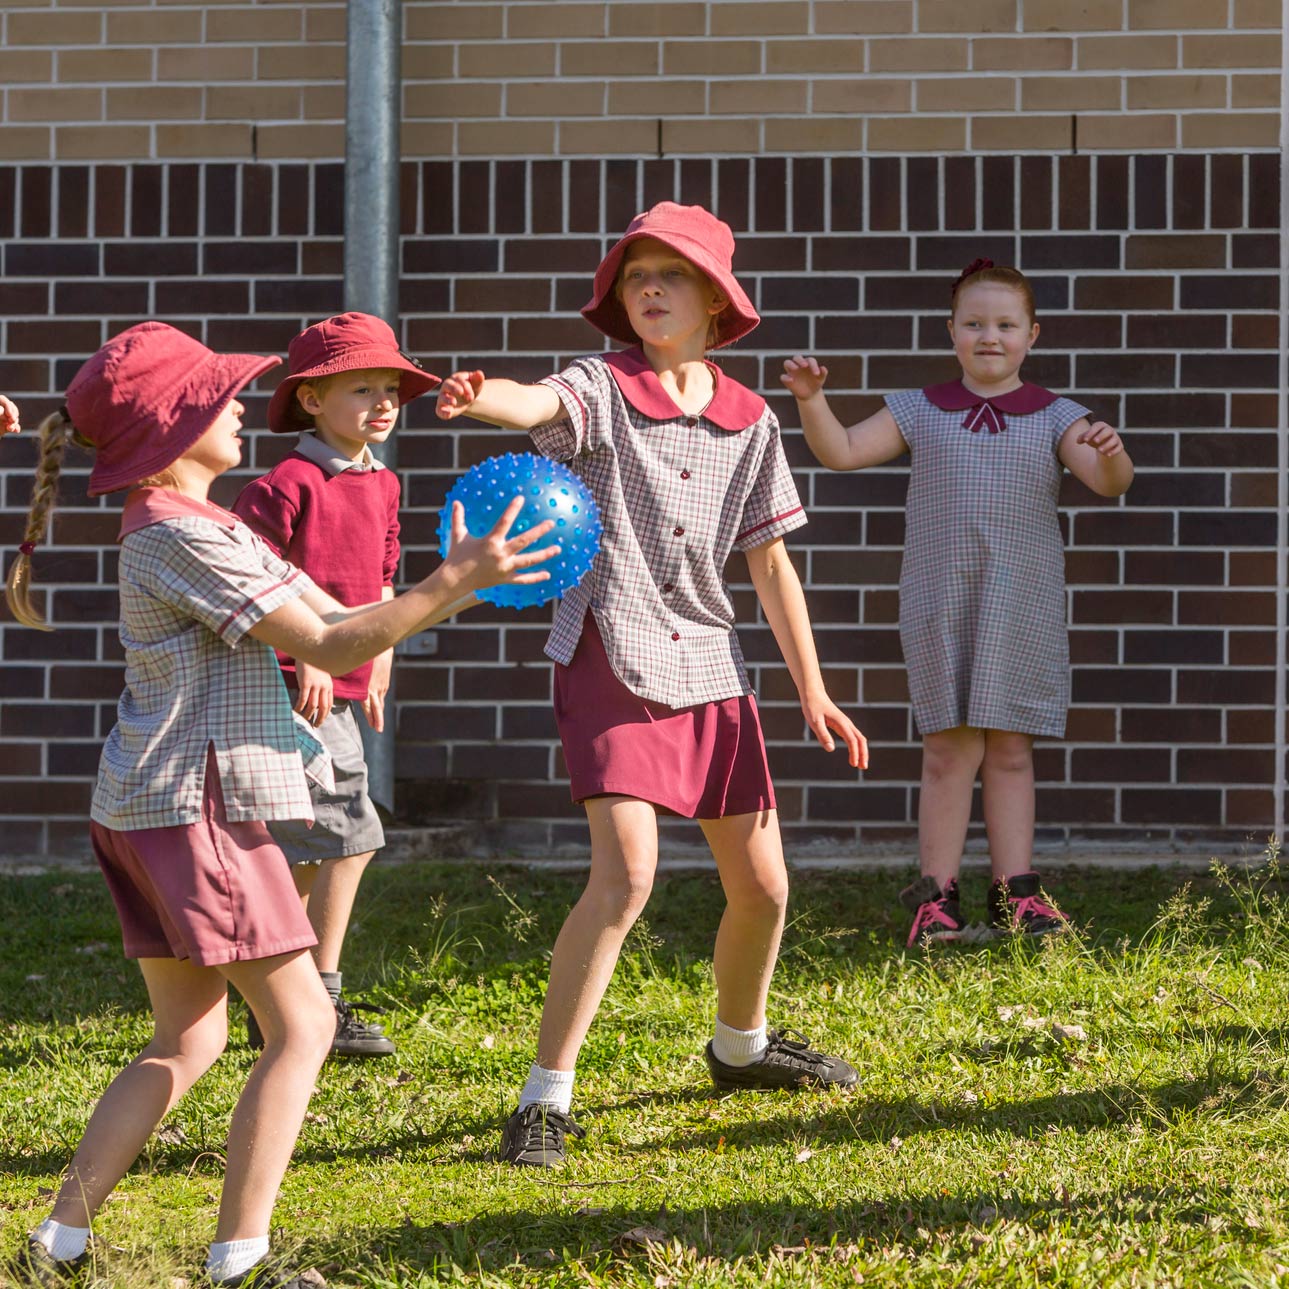 A group of kids in red school uniforms play with a blue ball on a grassy area^empty:{ds__assetid^as_asset:asset_name}